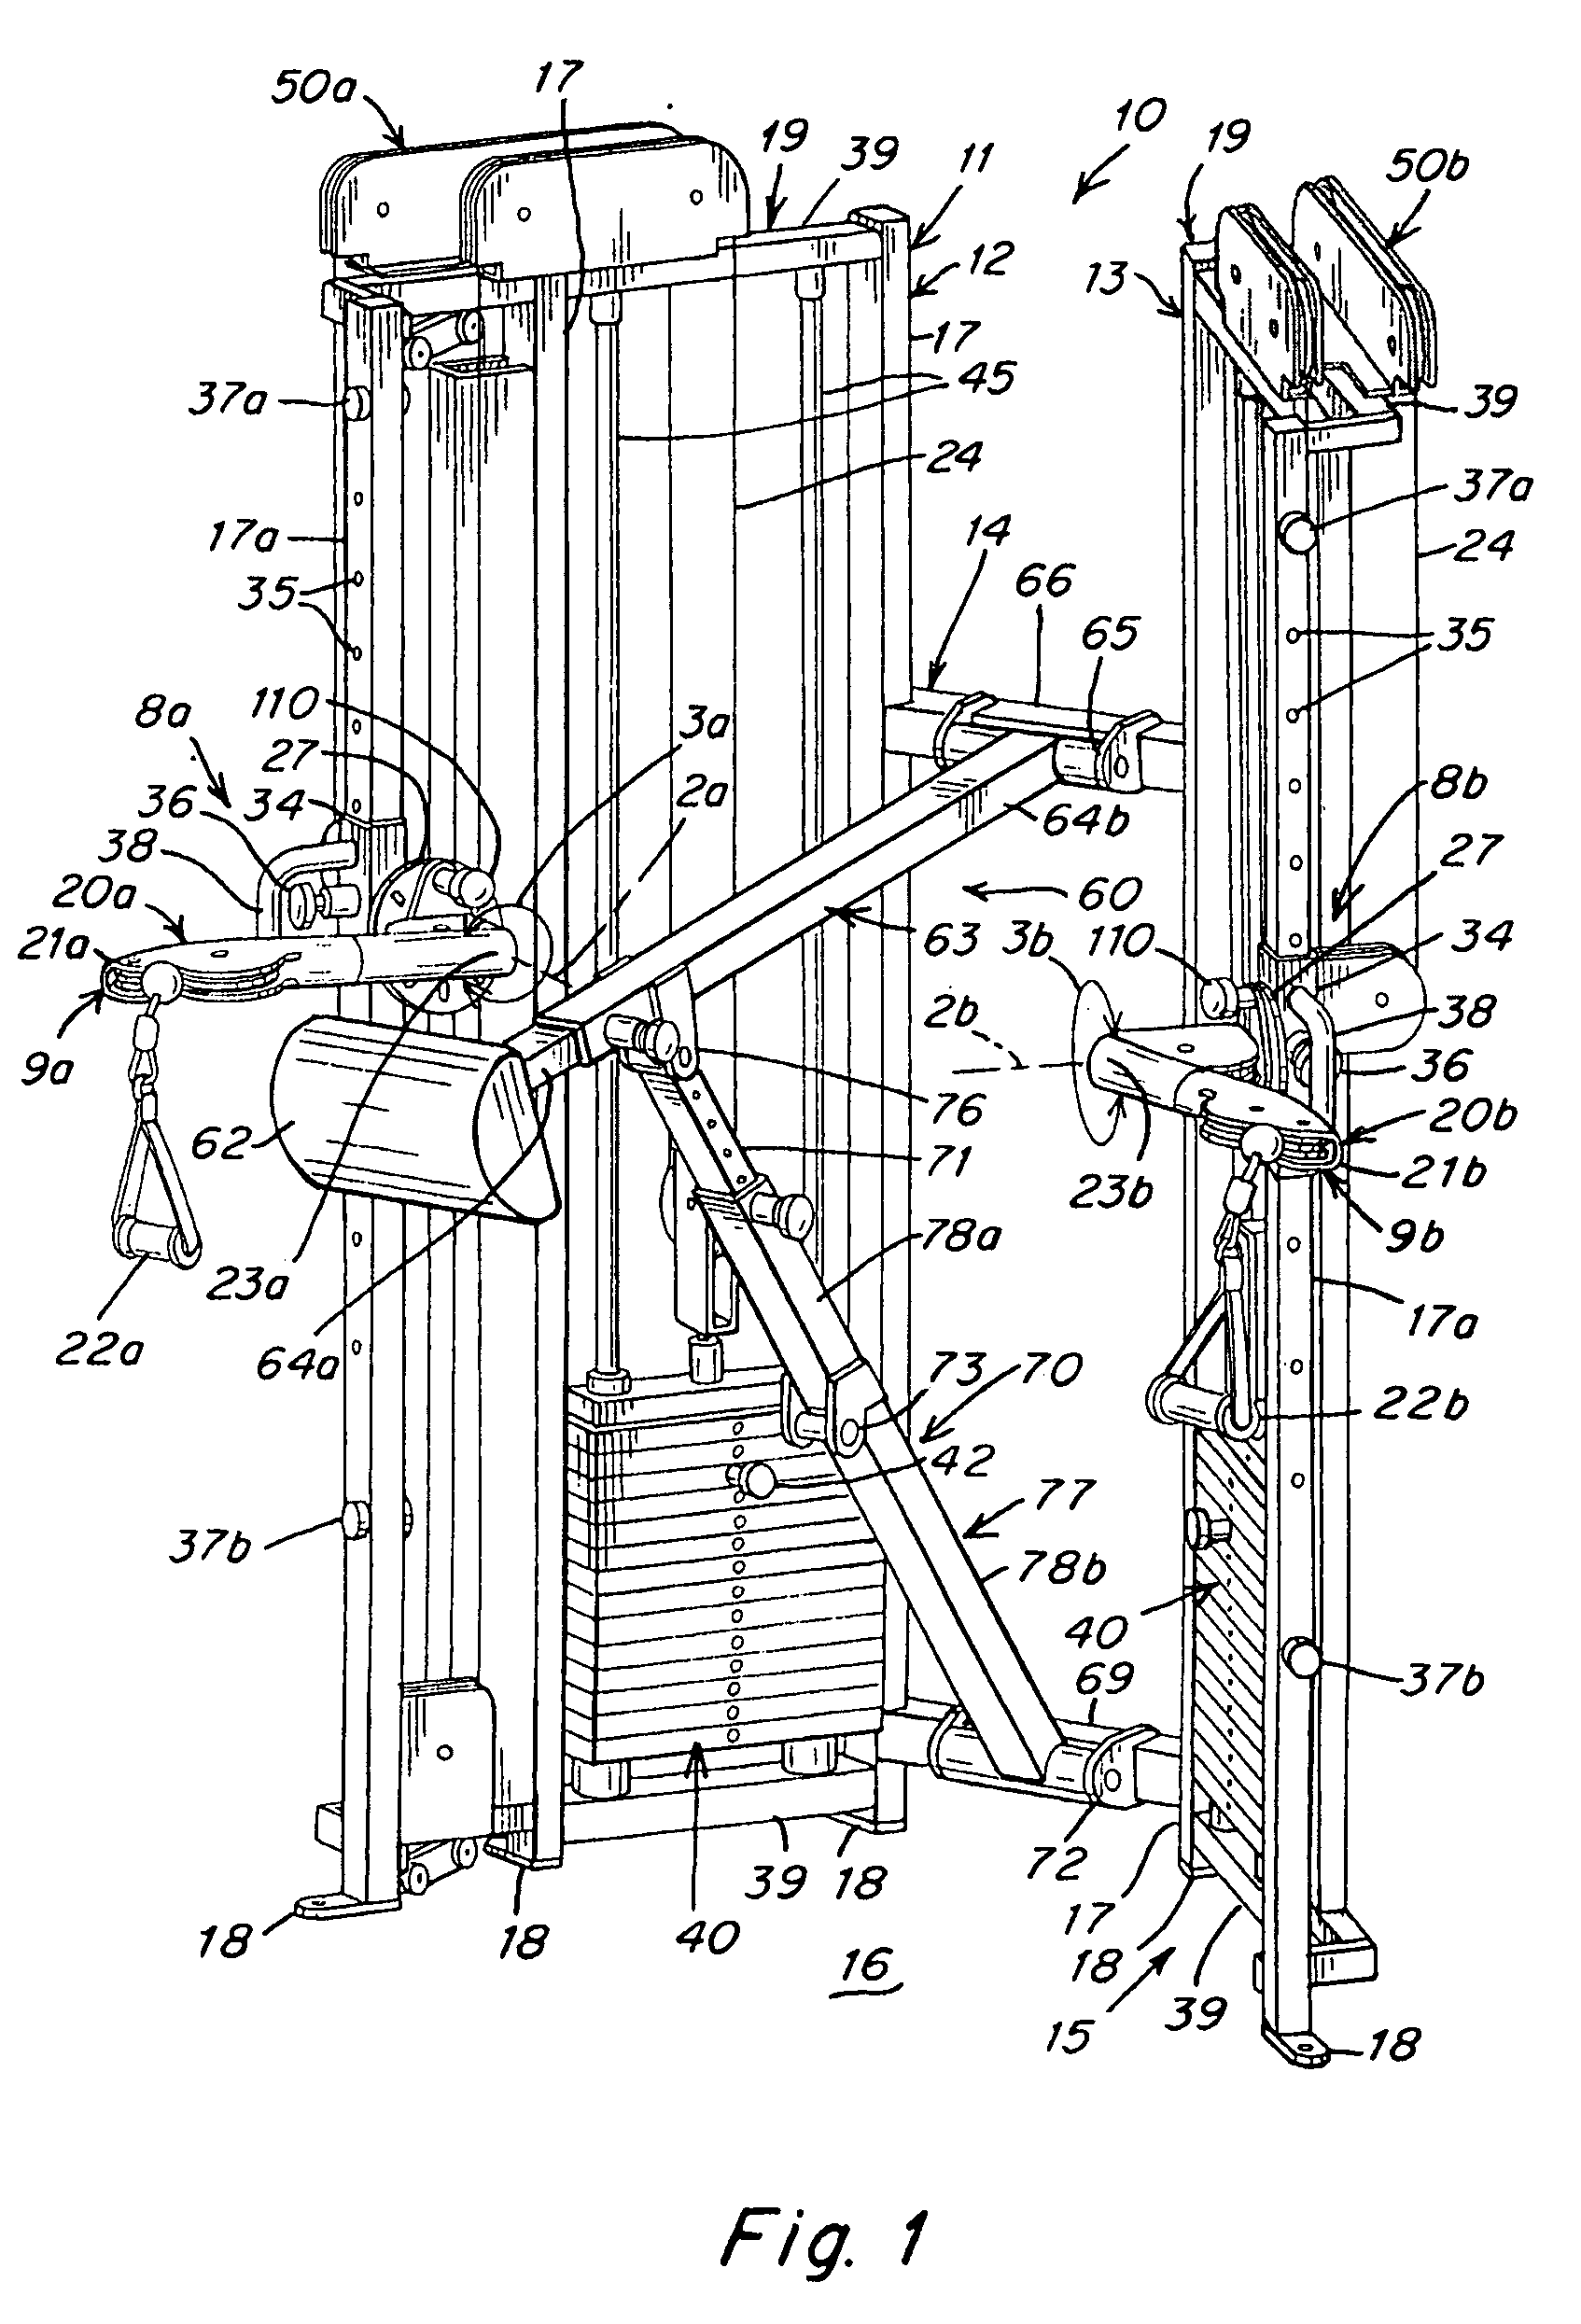 Adjustable assembly for exercise apparatus